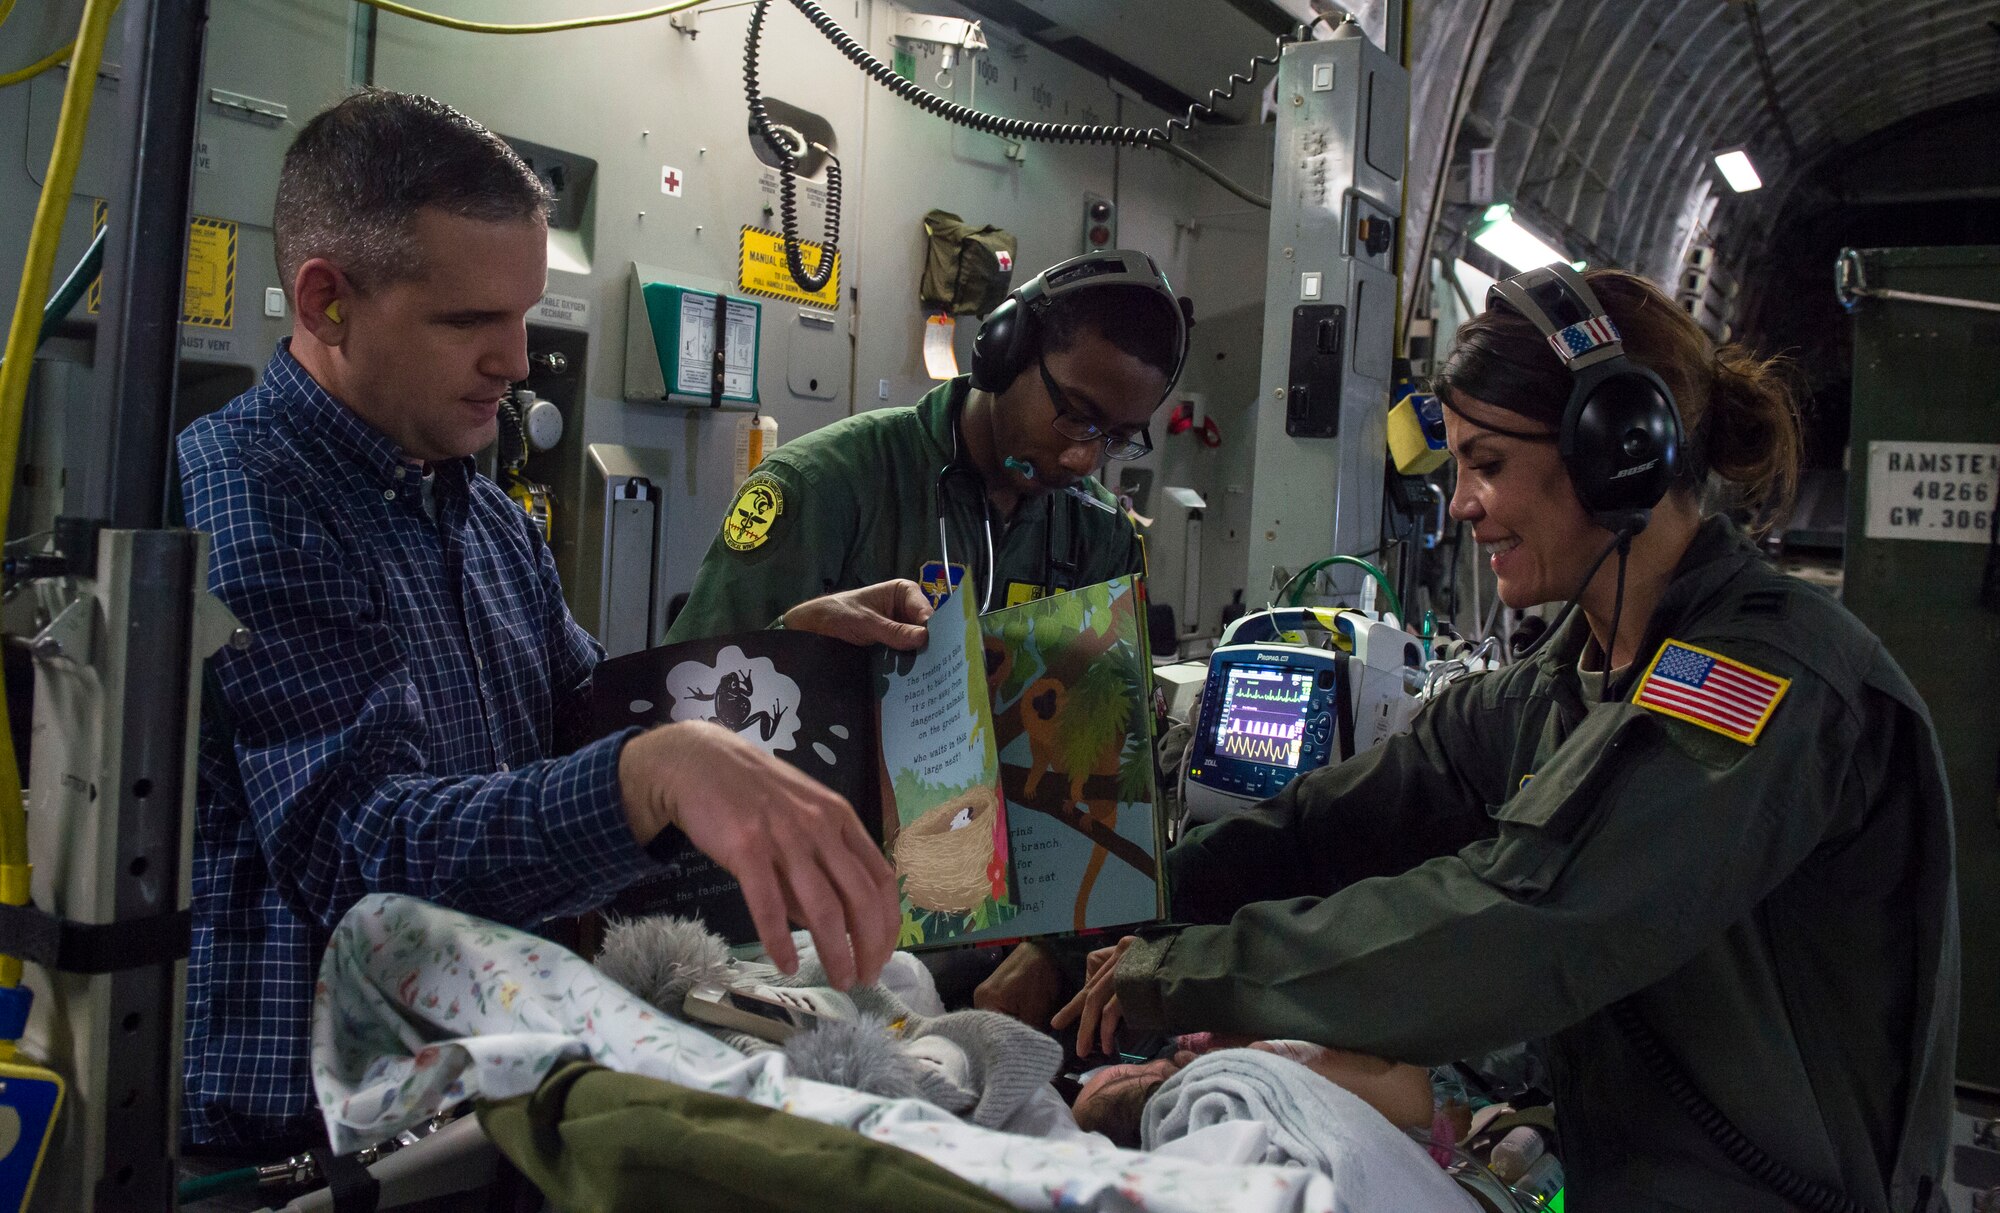 59th Medical Wing Critical Care Air Transport Team members, along with the patient's father, entertain an infant during an air transport mission from Germany to Walter Reed National Medical Center, Bethesda, Md., April 19th, 2018. CCATT teams maintain the standard of care provided to critically ill, injured or burned patients who require continuous stabilization and advanced care during transport to the next level of care. (U.S. Air Force photo by Senior Airman Keifer Bowes)